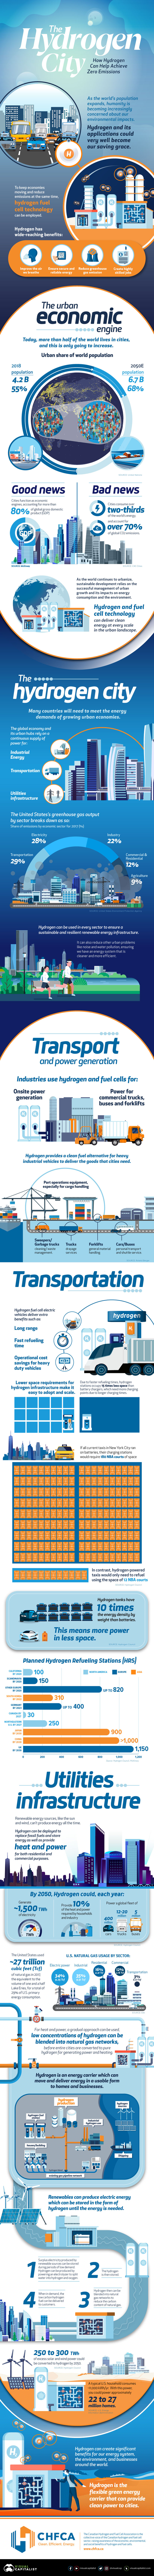 The Hydrogen City: How Hydrogen Can Help to Achieve Zero Emissions